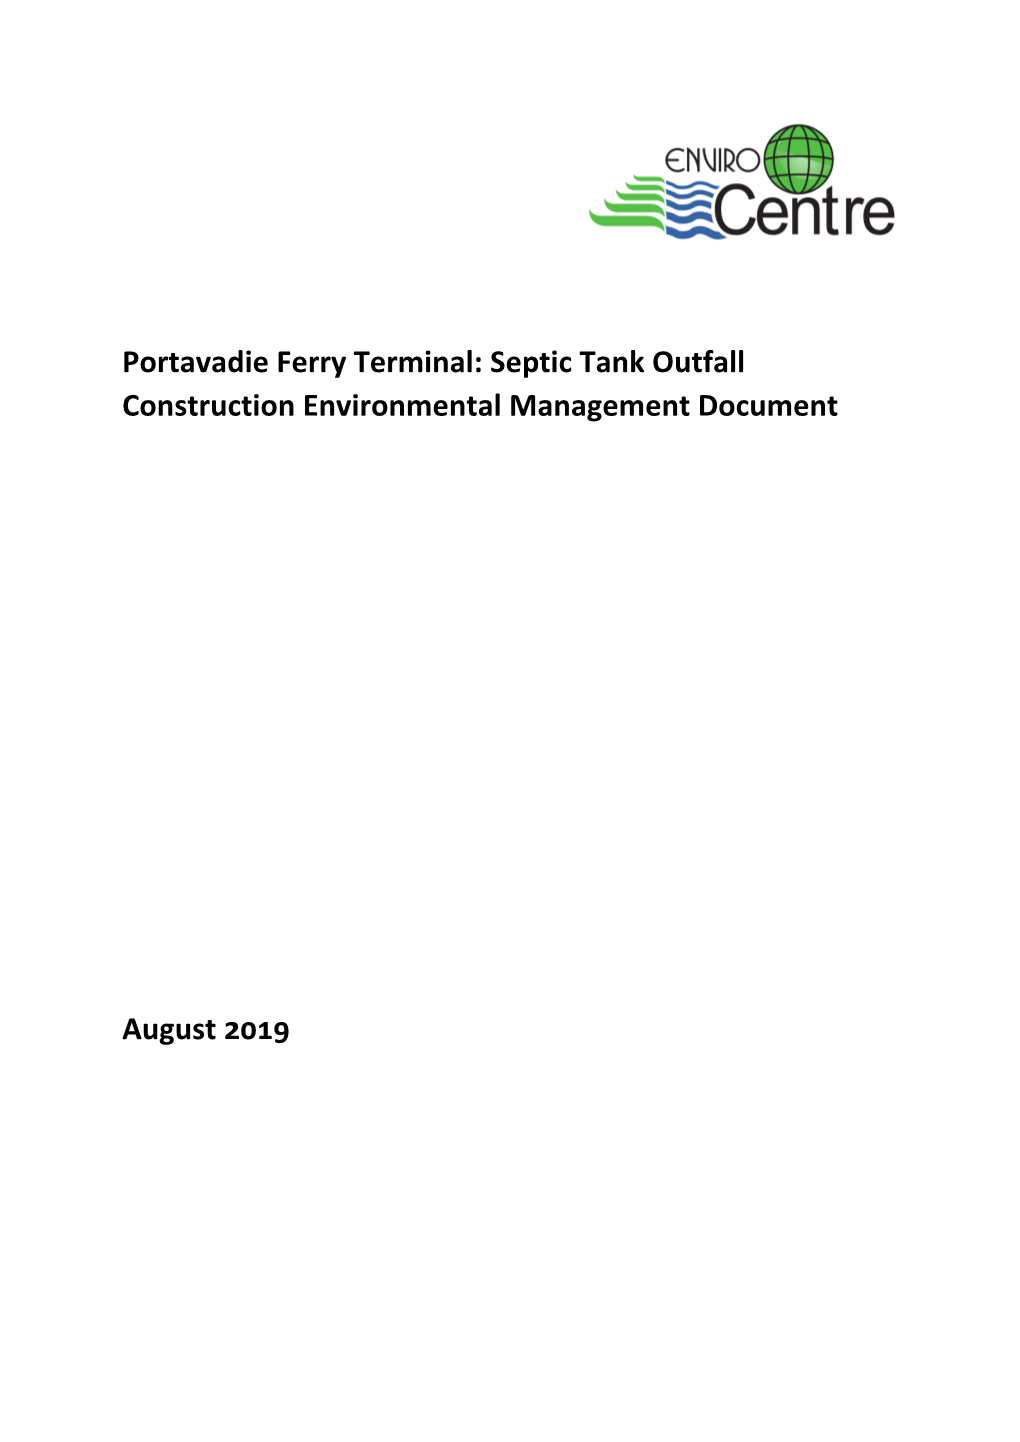 Portavadie Ferry Terminal: Septic Tank Outfall Construction Environmental Management Document